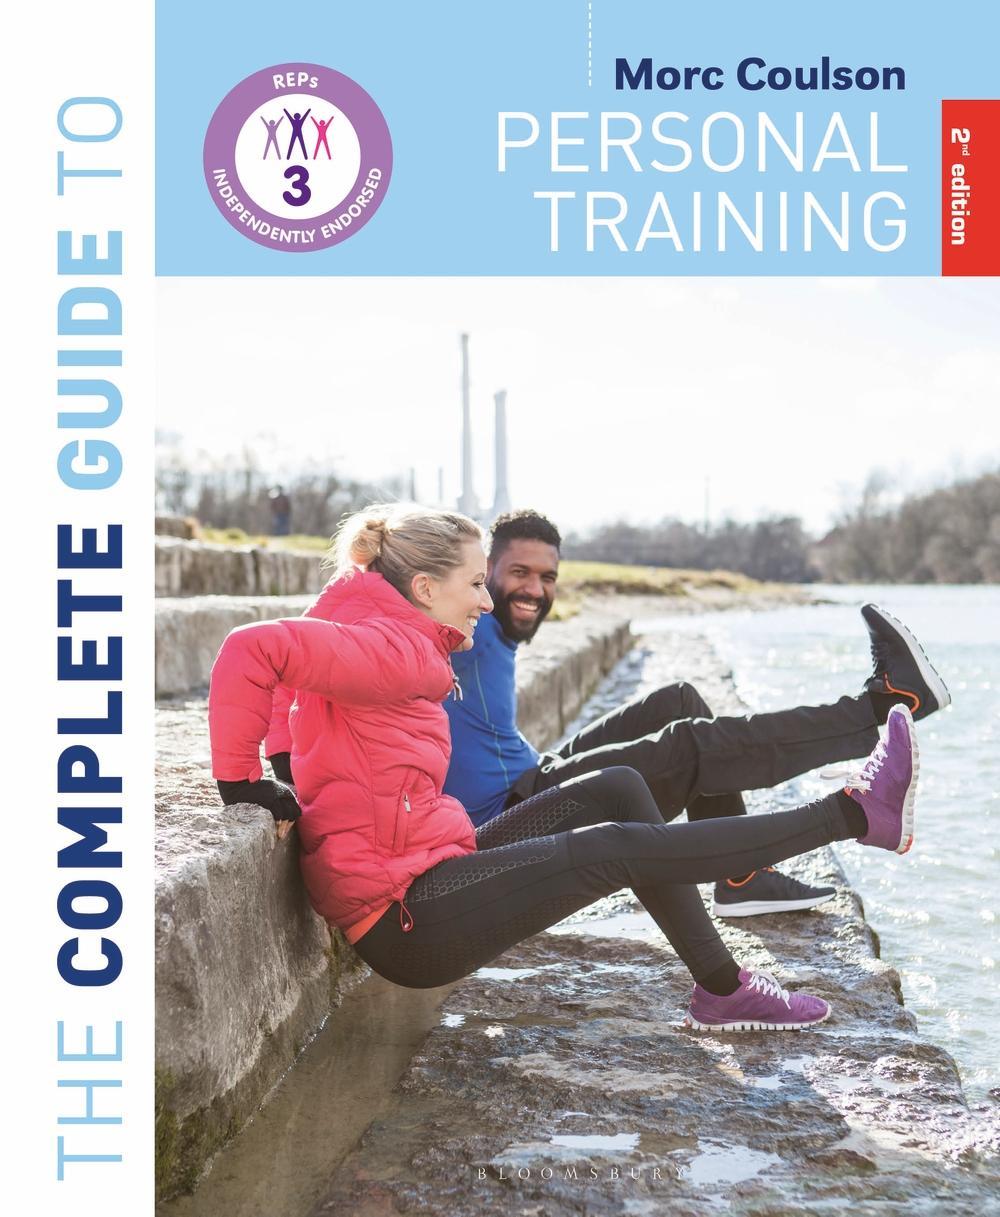 Complete Guide to Personal Training: 2nd Edition - Morc Coulson